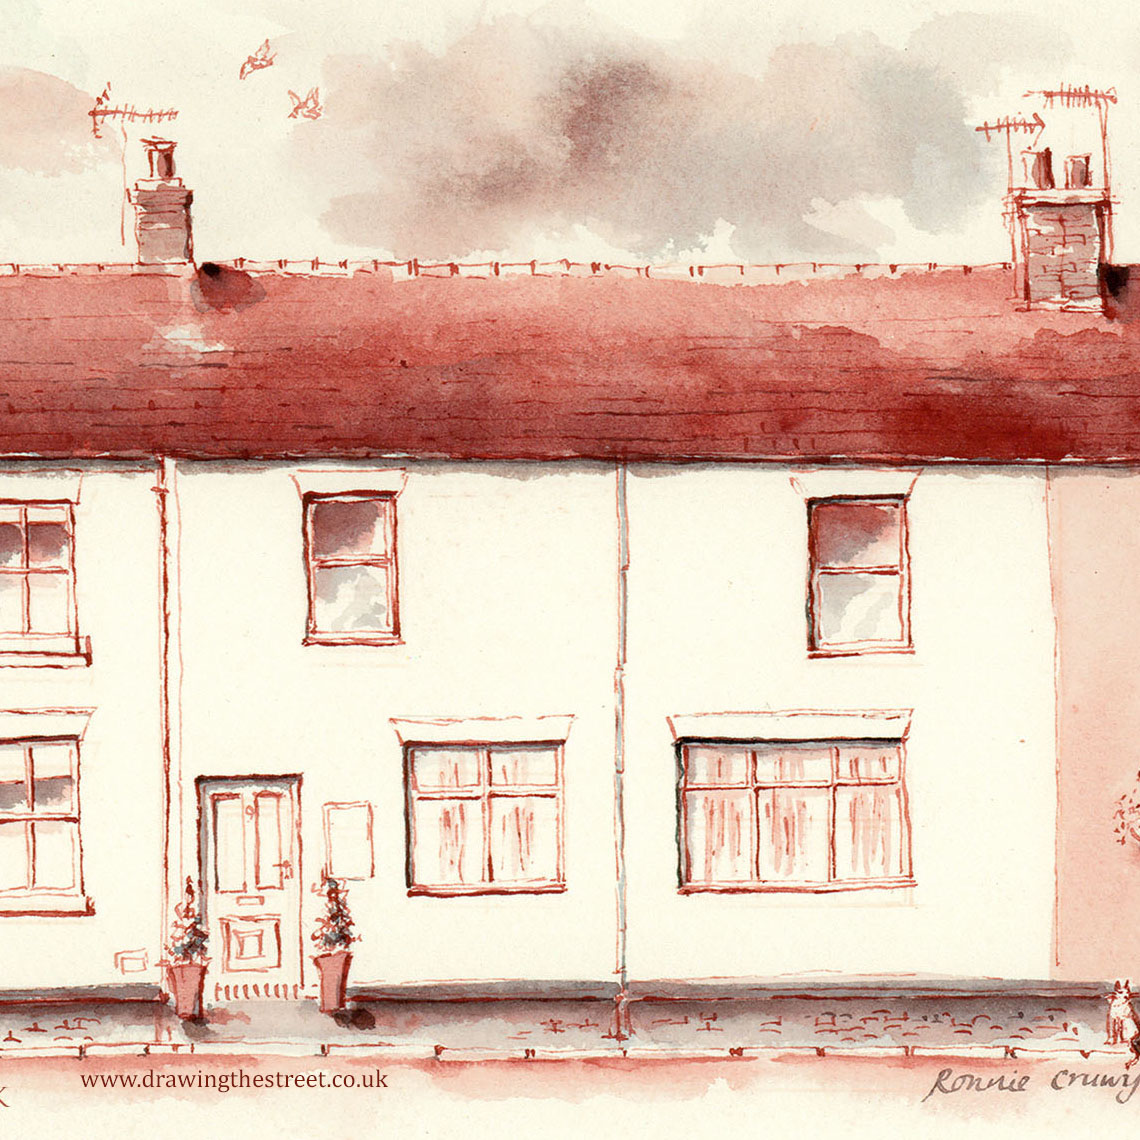 pen and ink drawing of station cottages Baldwins Gate by Ronnie Cruwys